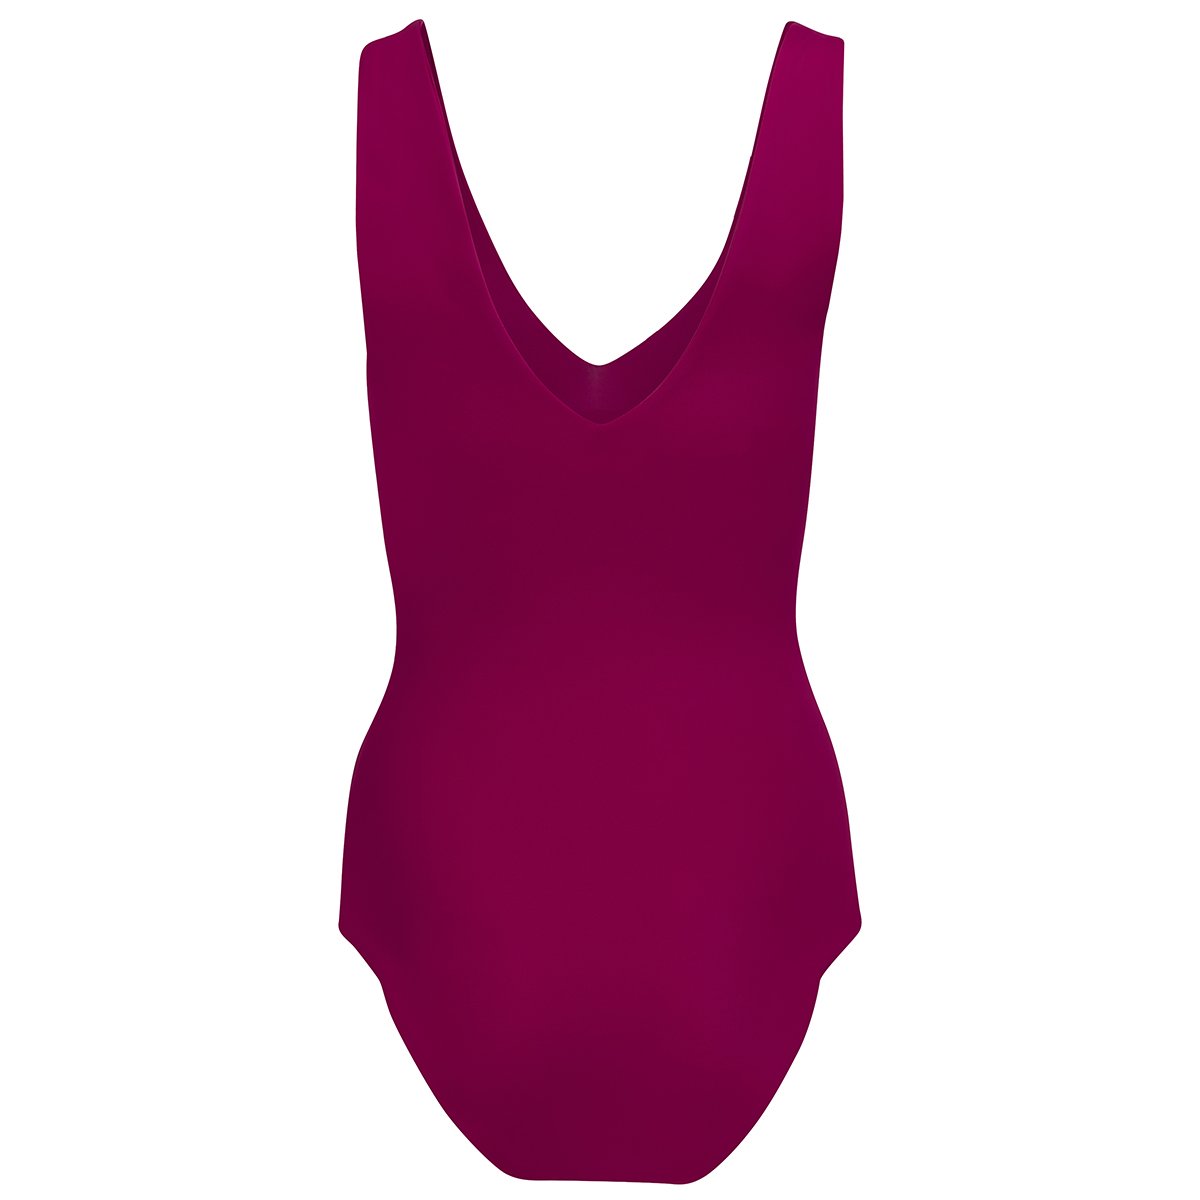 Roma Square: The Modern Square Classic One Piece